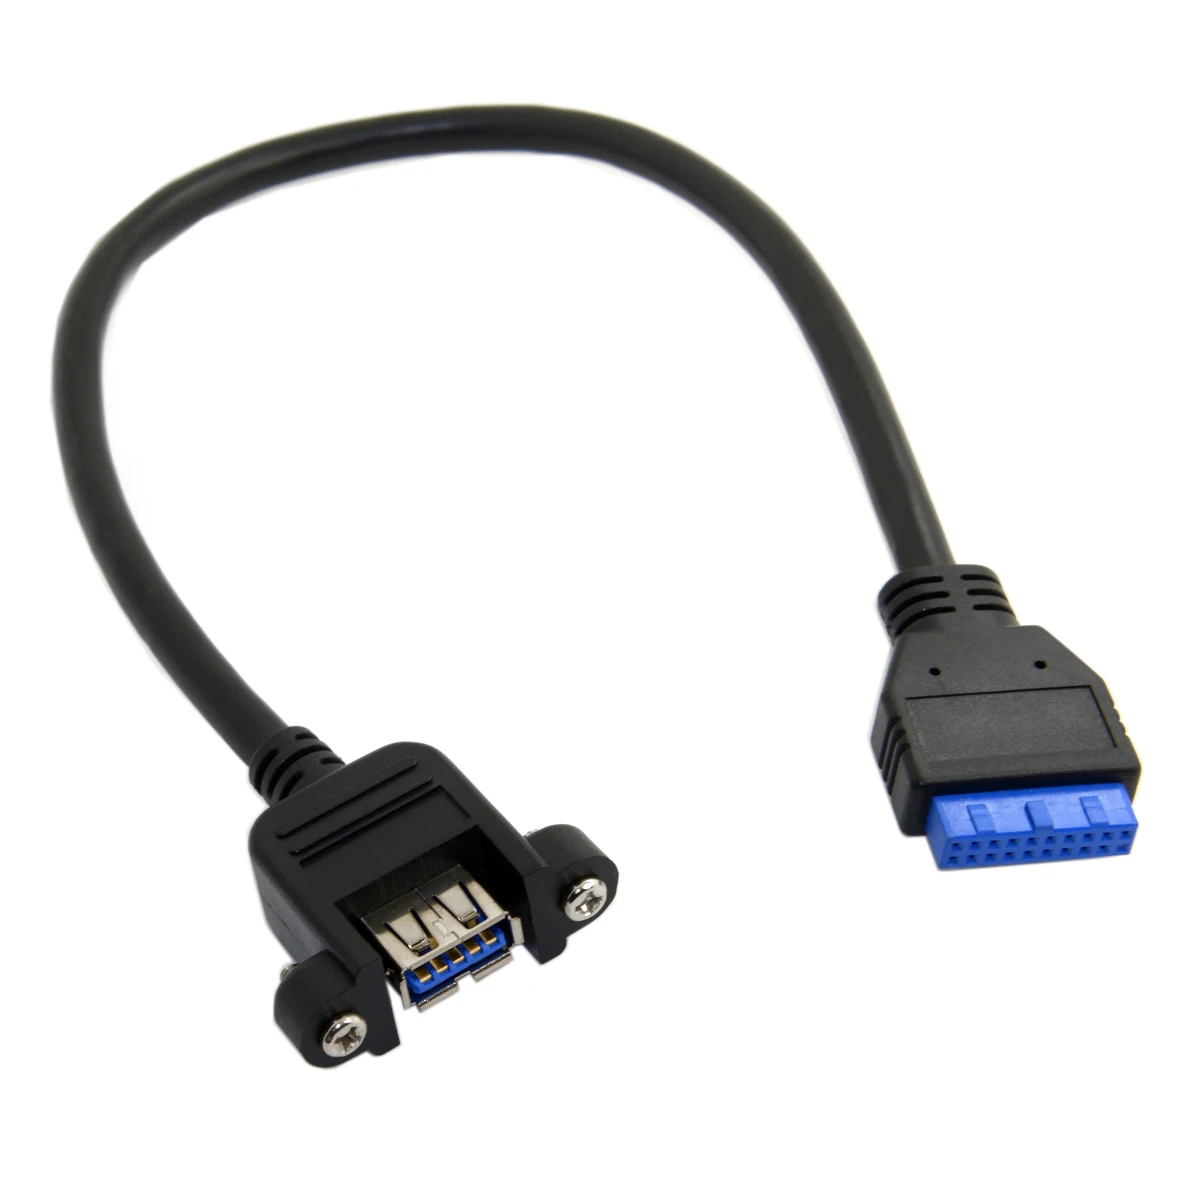 

CYDZ Female USB 3.0 Single Port A Screw Mount Type to Up Angled Motherboard Header 20pin Cable 25cm